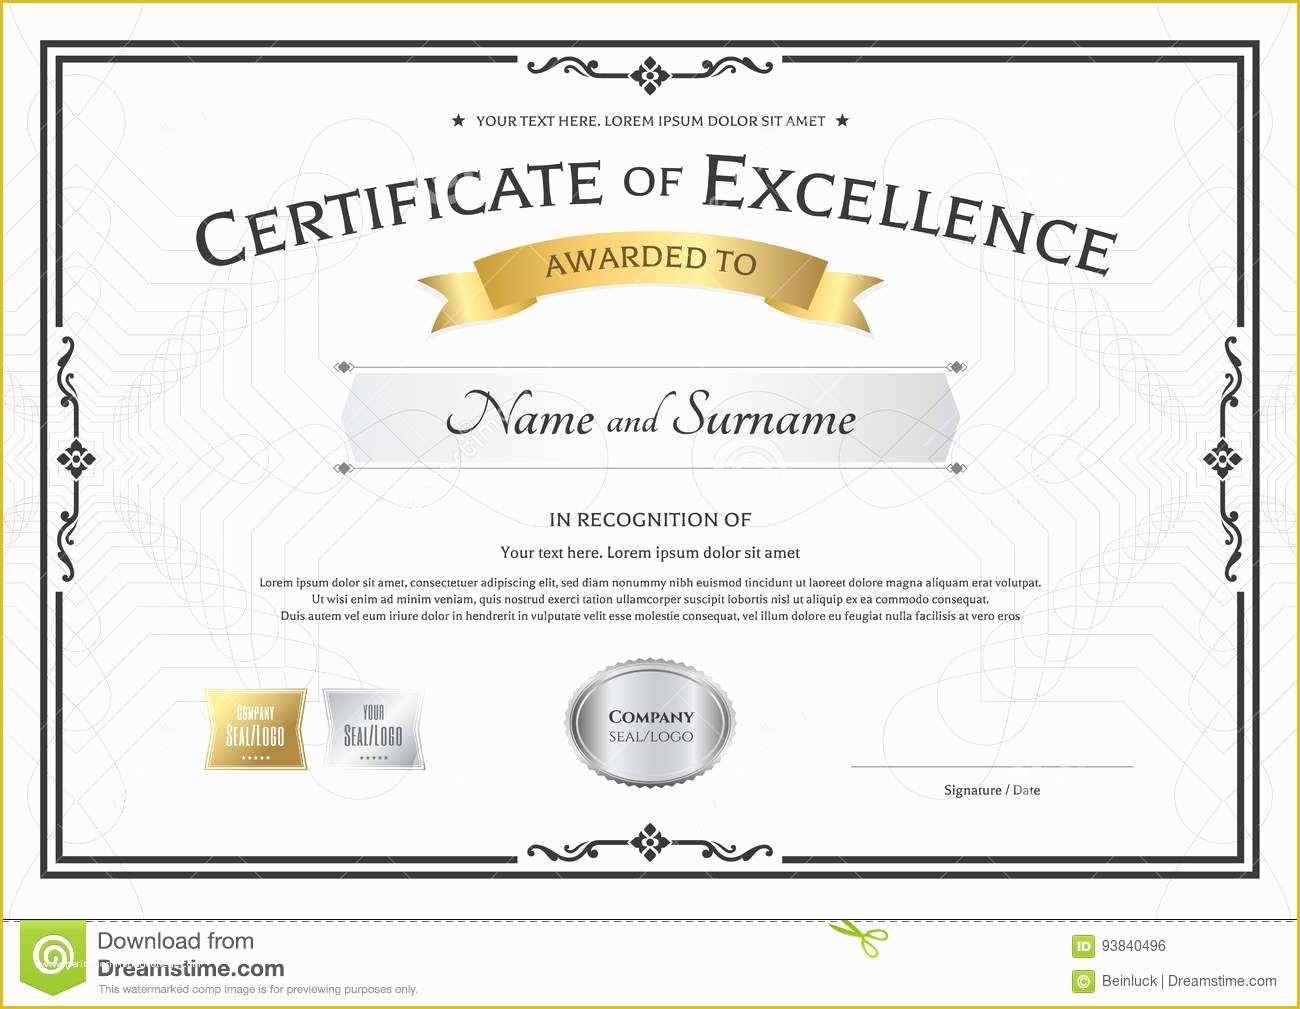 Free Certificate Of Excellence Template Of Certificate Excellence Template with Gold Award Ribbon